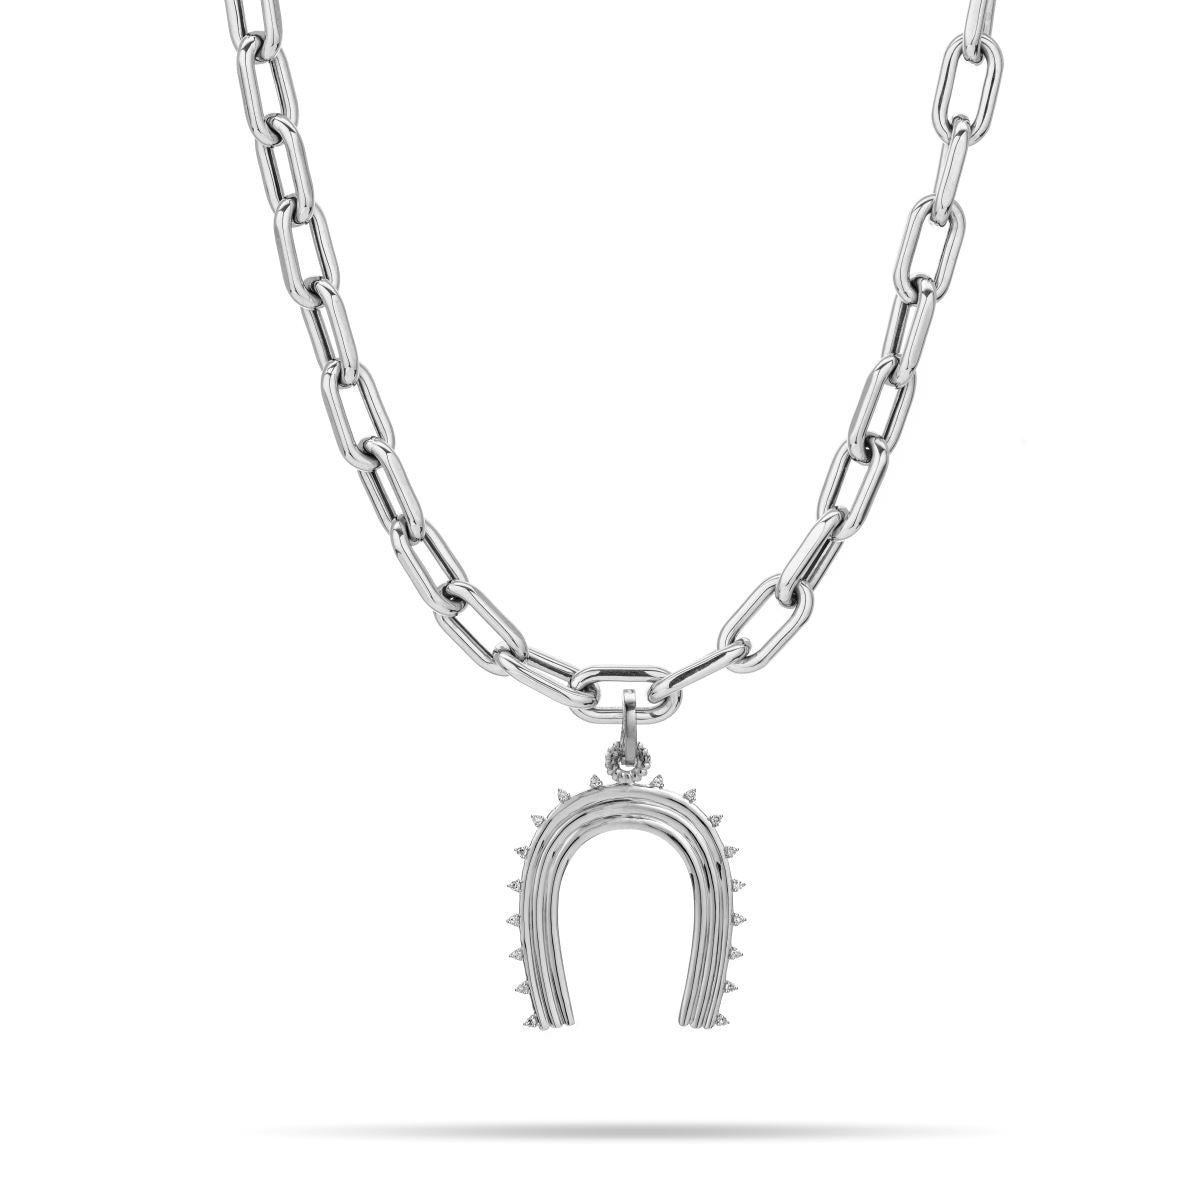 XL Groovy Diamond Horseshoe Hinged Charm in Sterling Silver